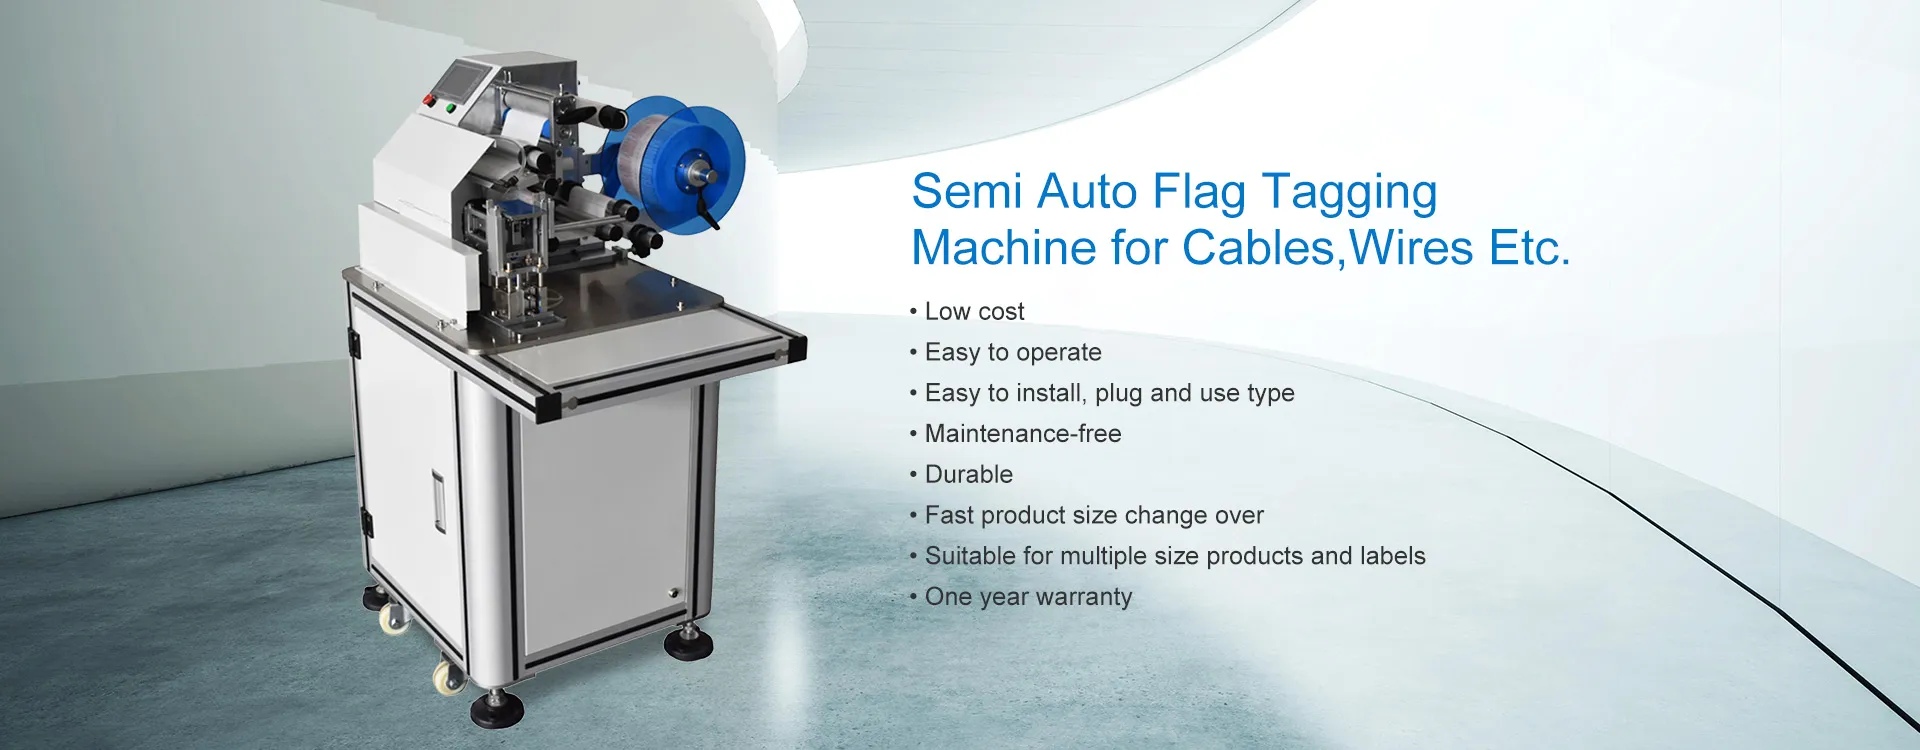 Semi Automatic Flag Tagging Machine for Cables Wires etc.